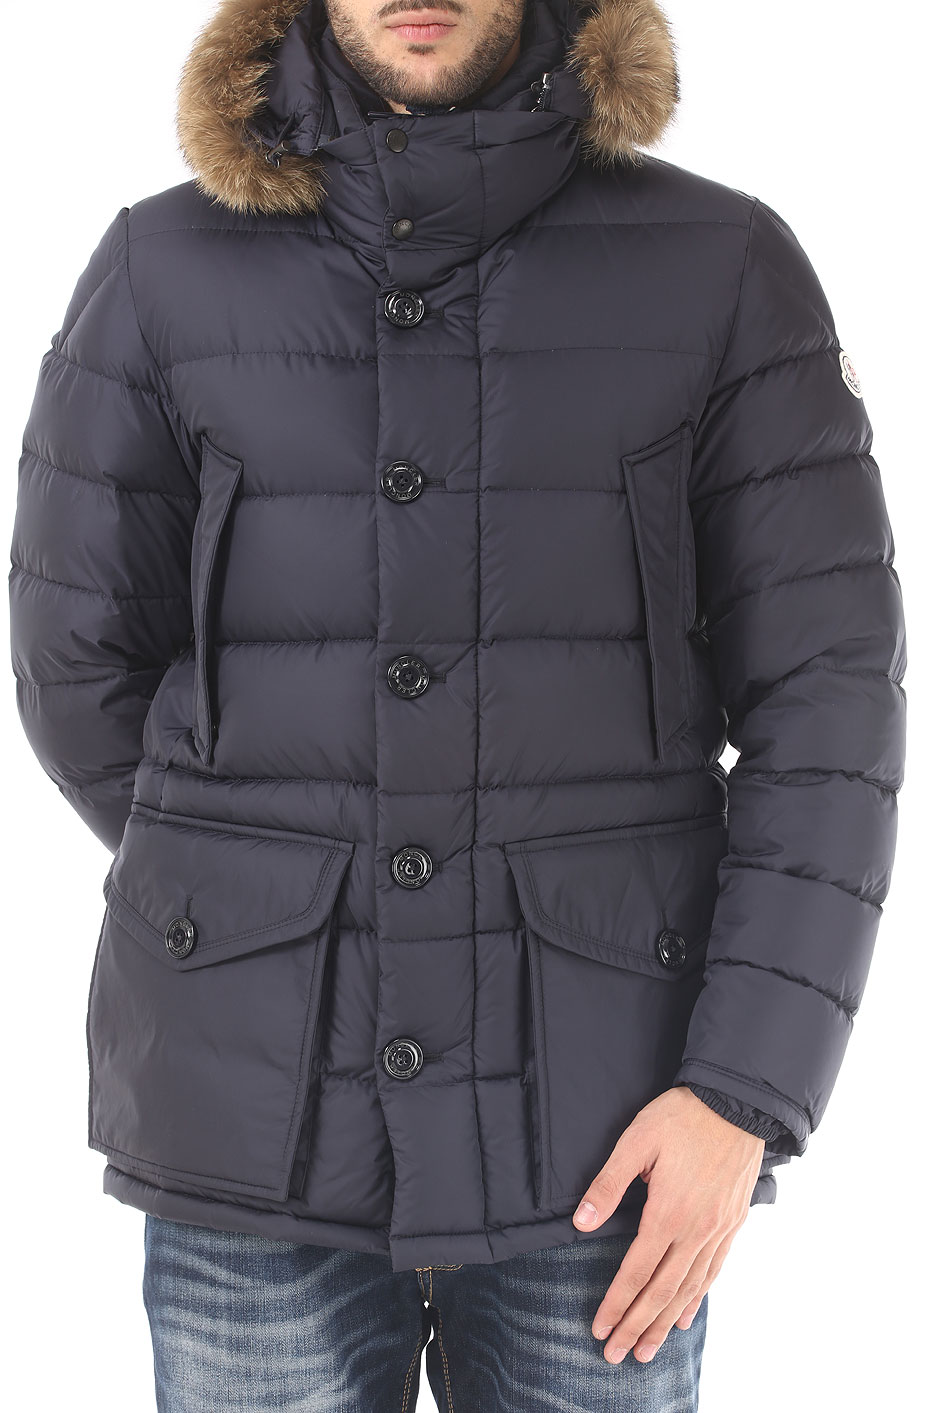 Mens Clothing Moncler, Style code: cluny-413802568352-742